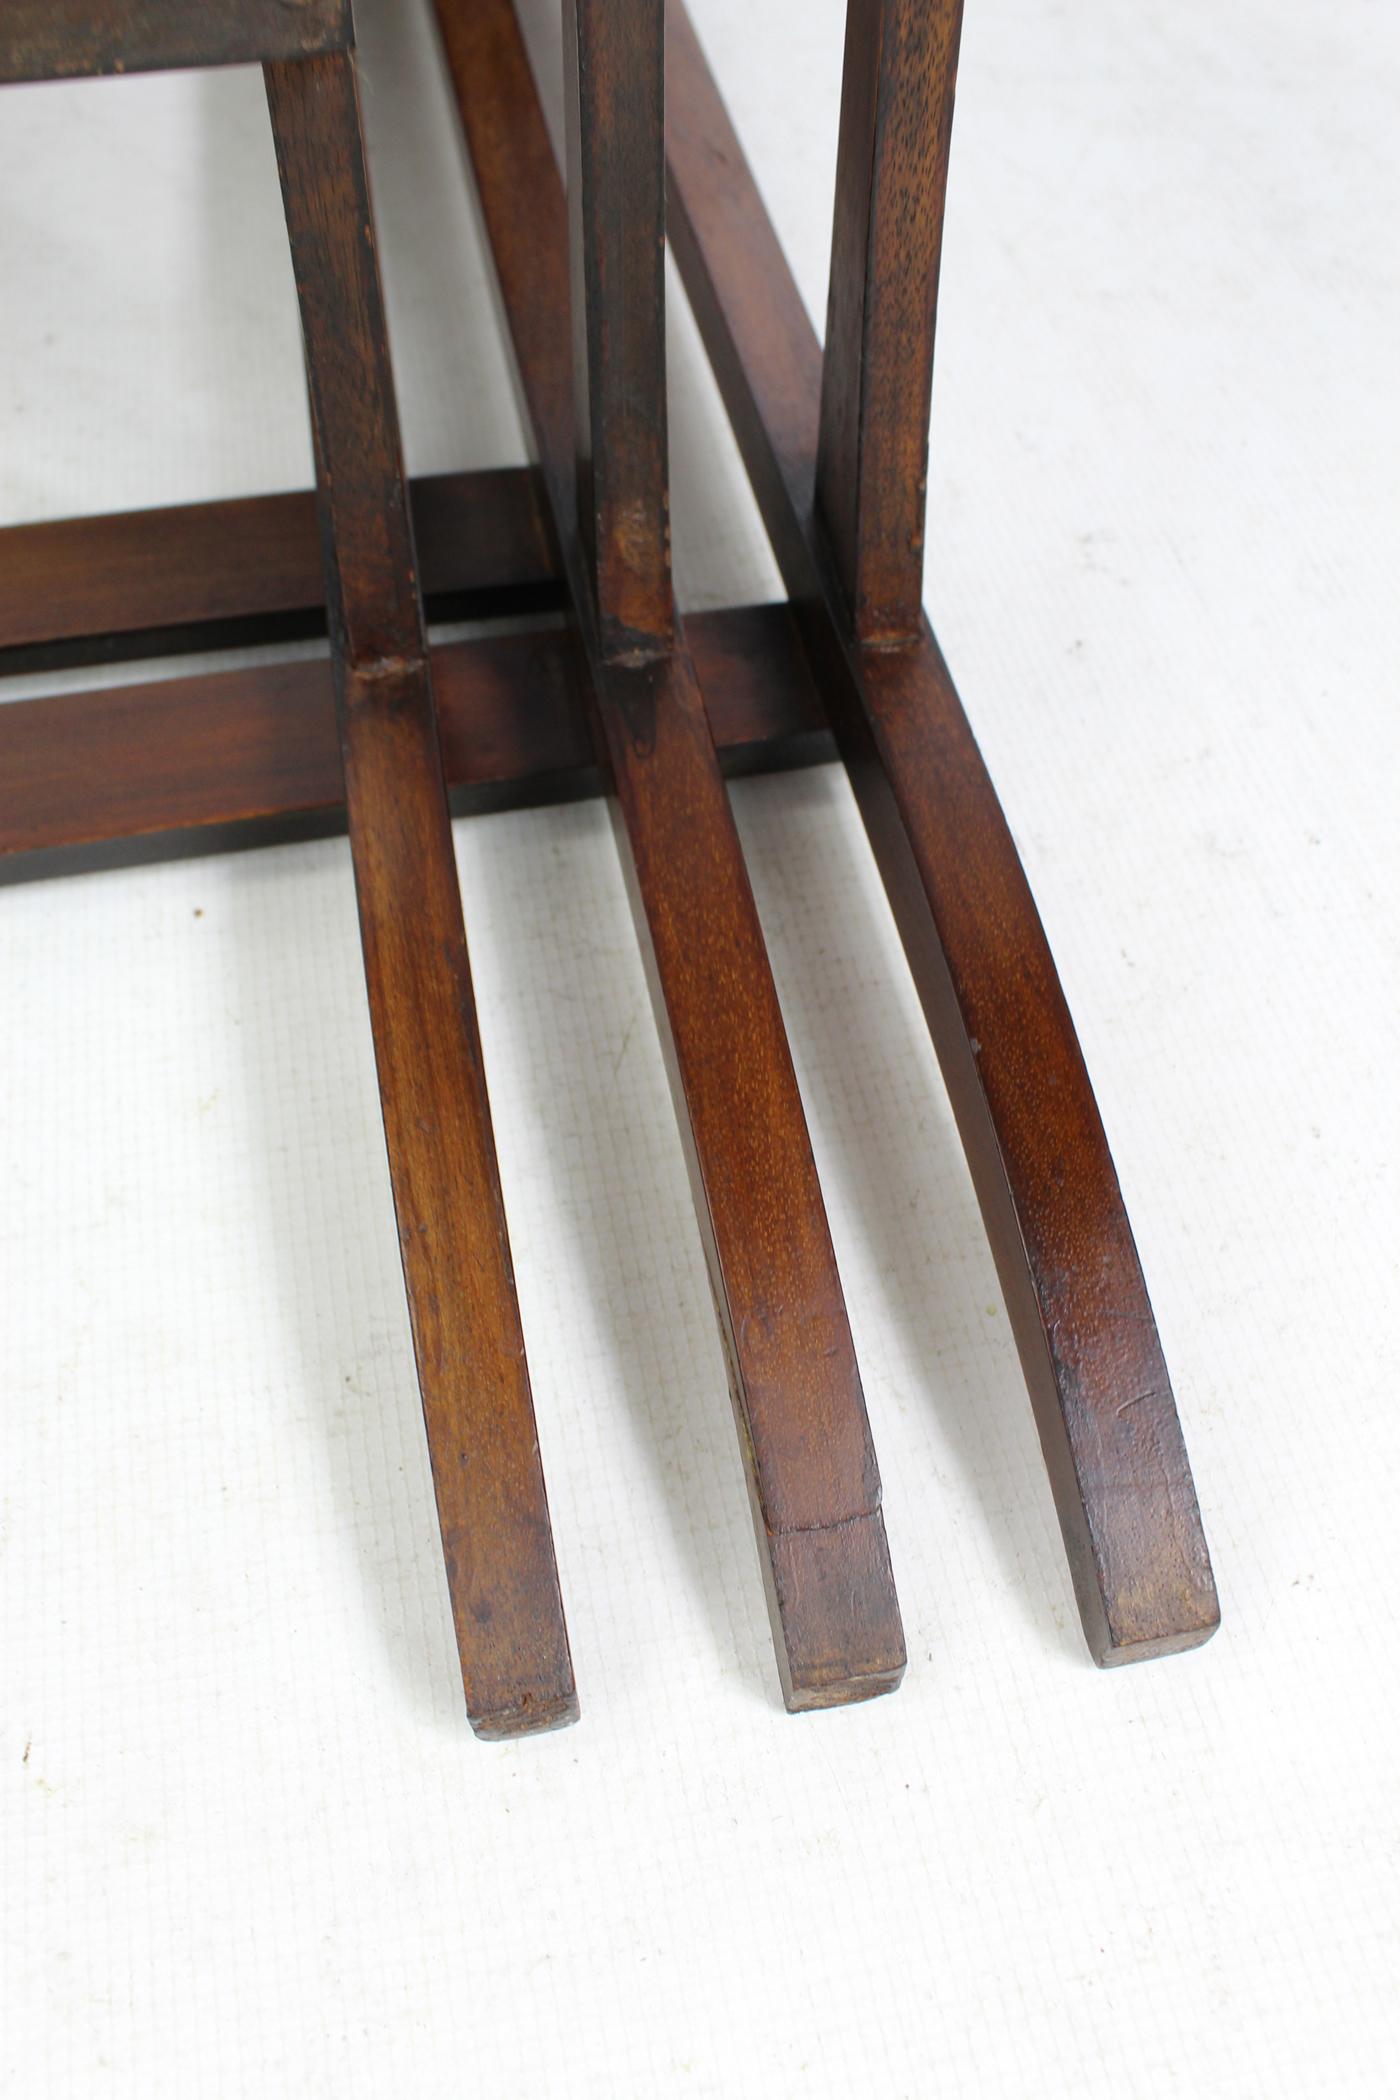 Antique Edwardian Mahogany Nest of Tables Nesting Coffee Tables English, 1910 For Sale 8